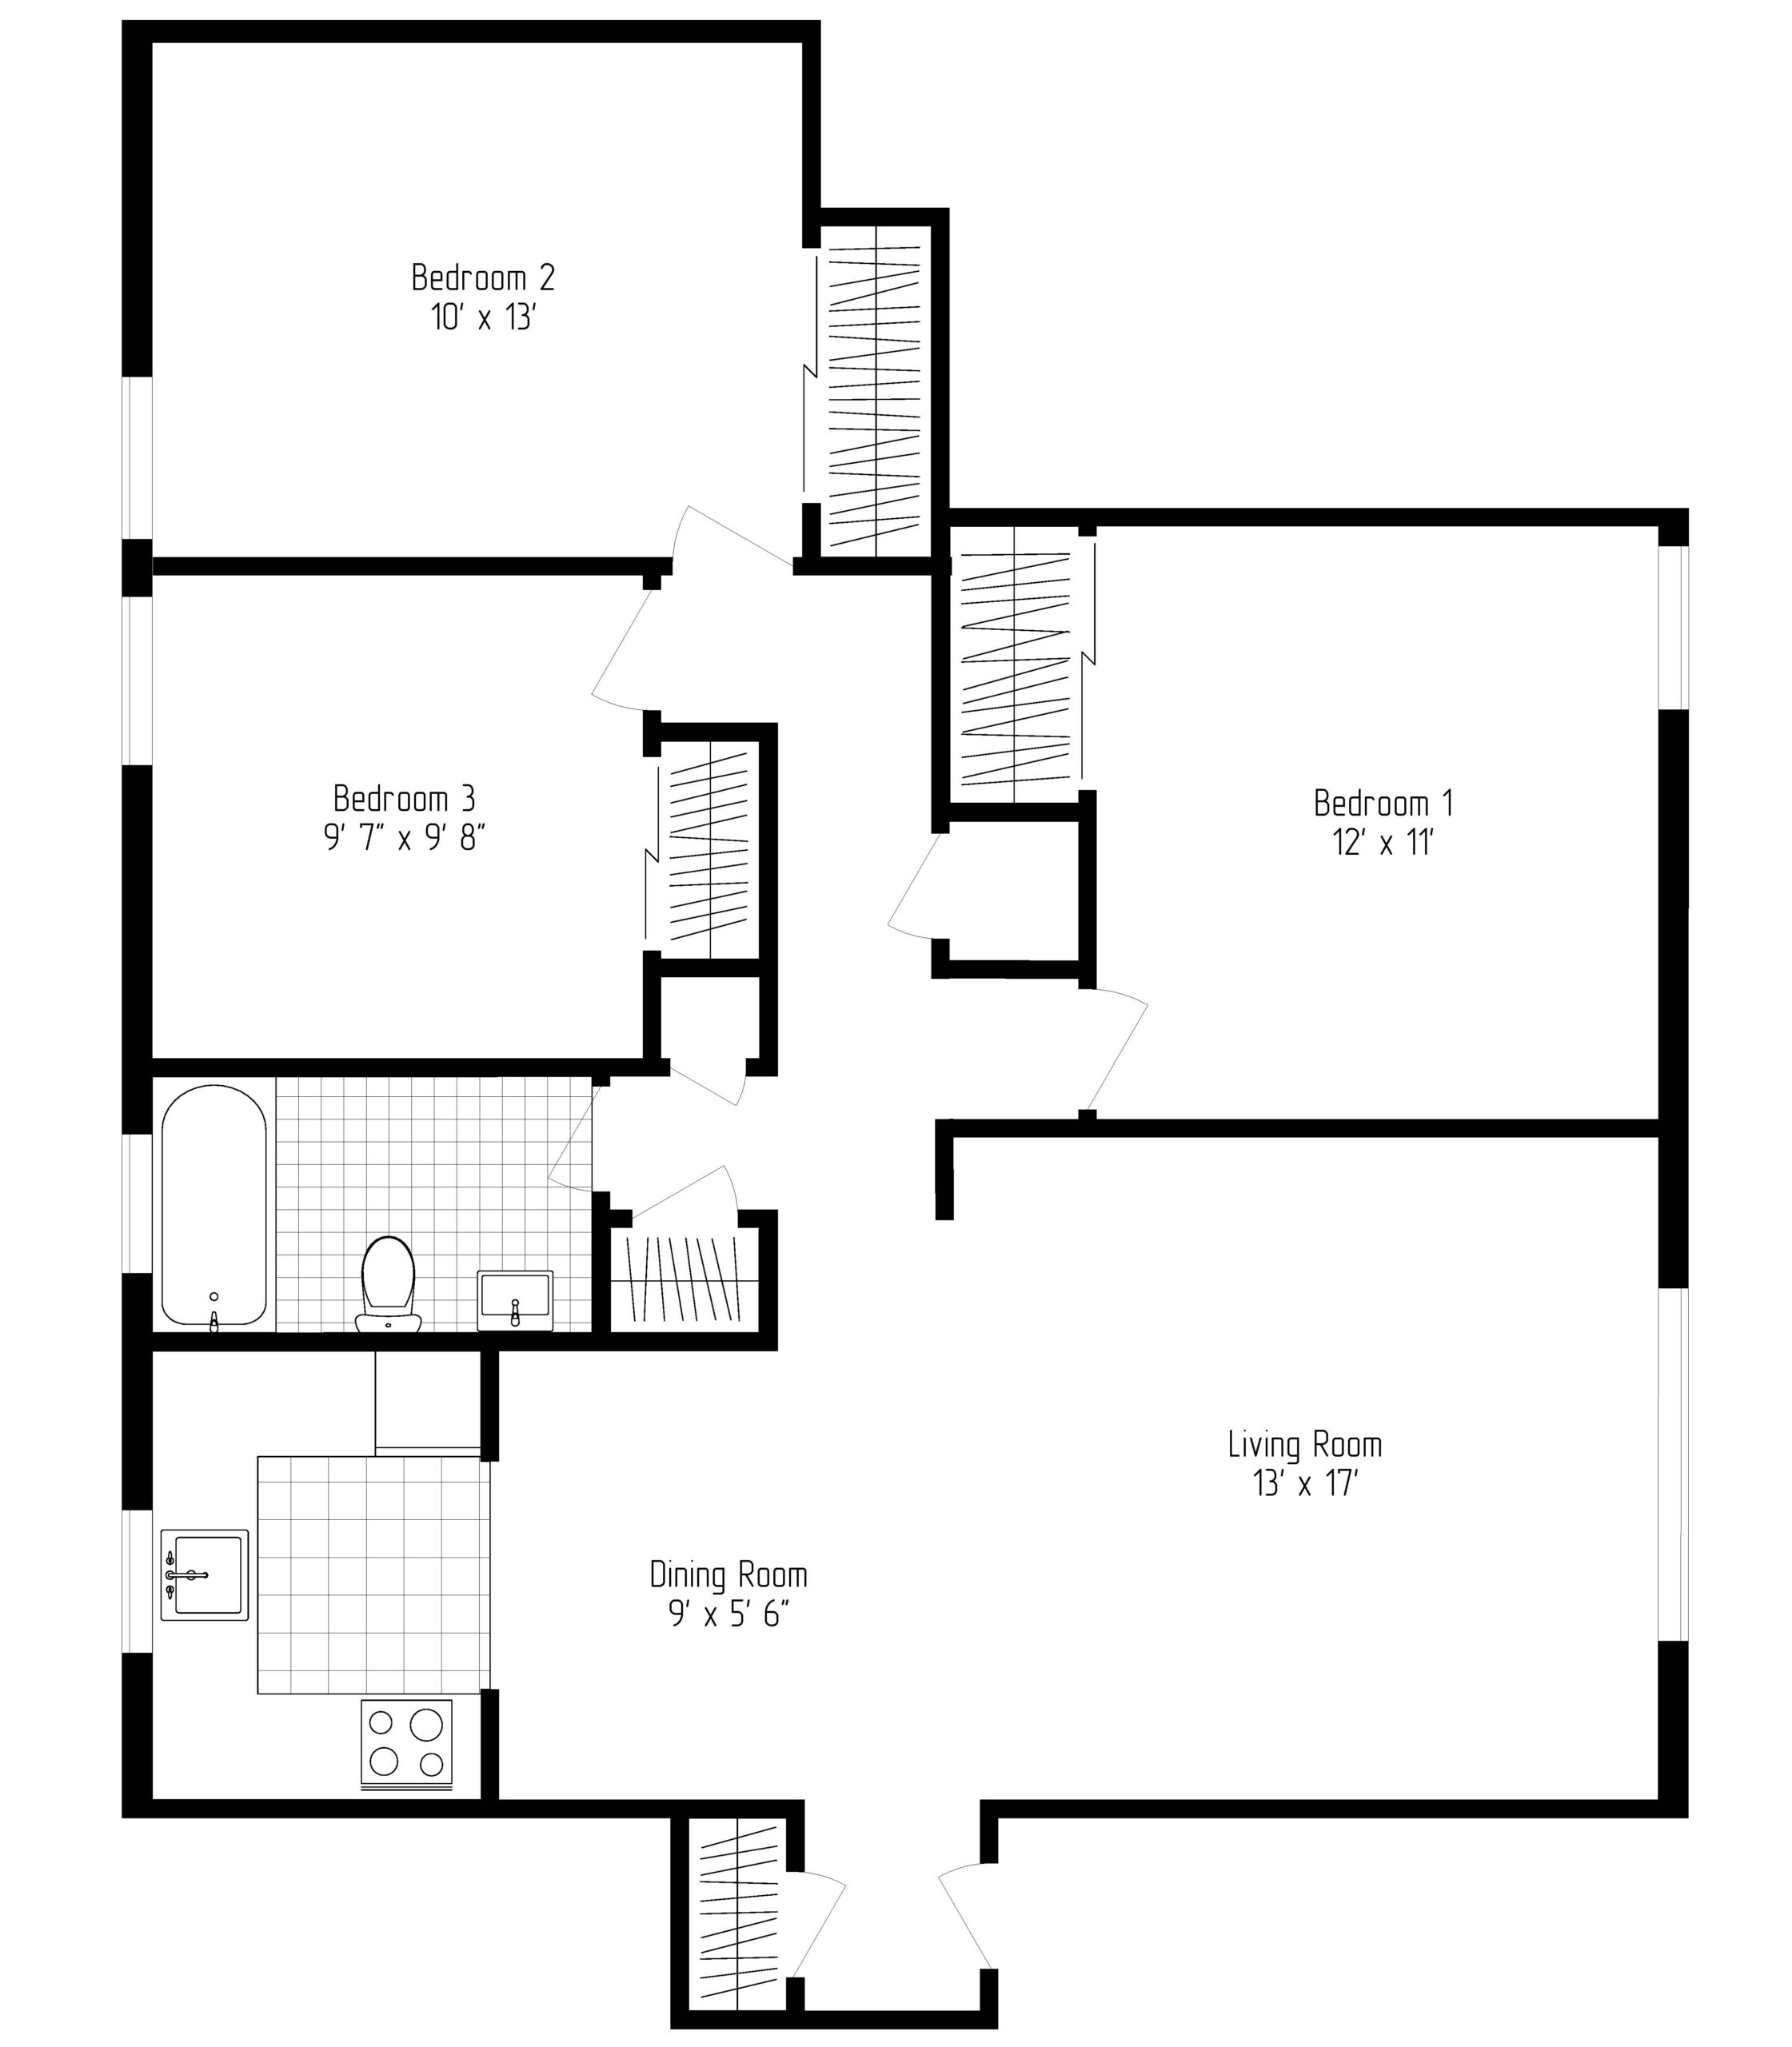 Floor Plan Sketch on 17” x 22” Graph Paper  Rough Scale Drawing  Room  dimensions  Room Names  Basic House Characteristics AutoCAD floor plan  including: - ppt download